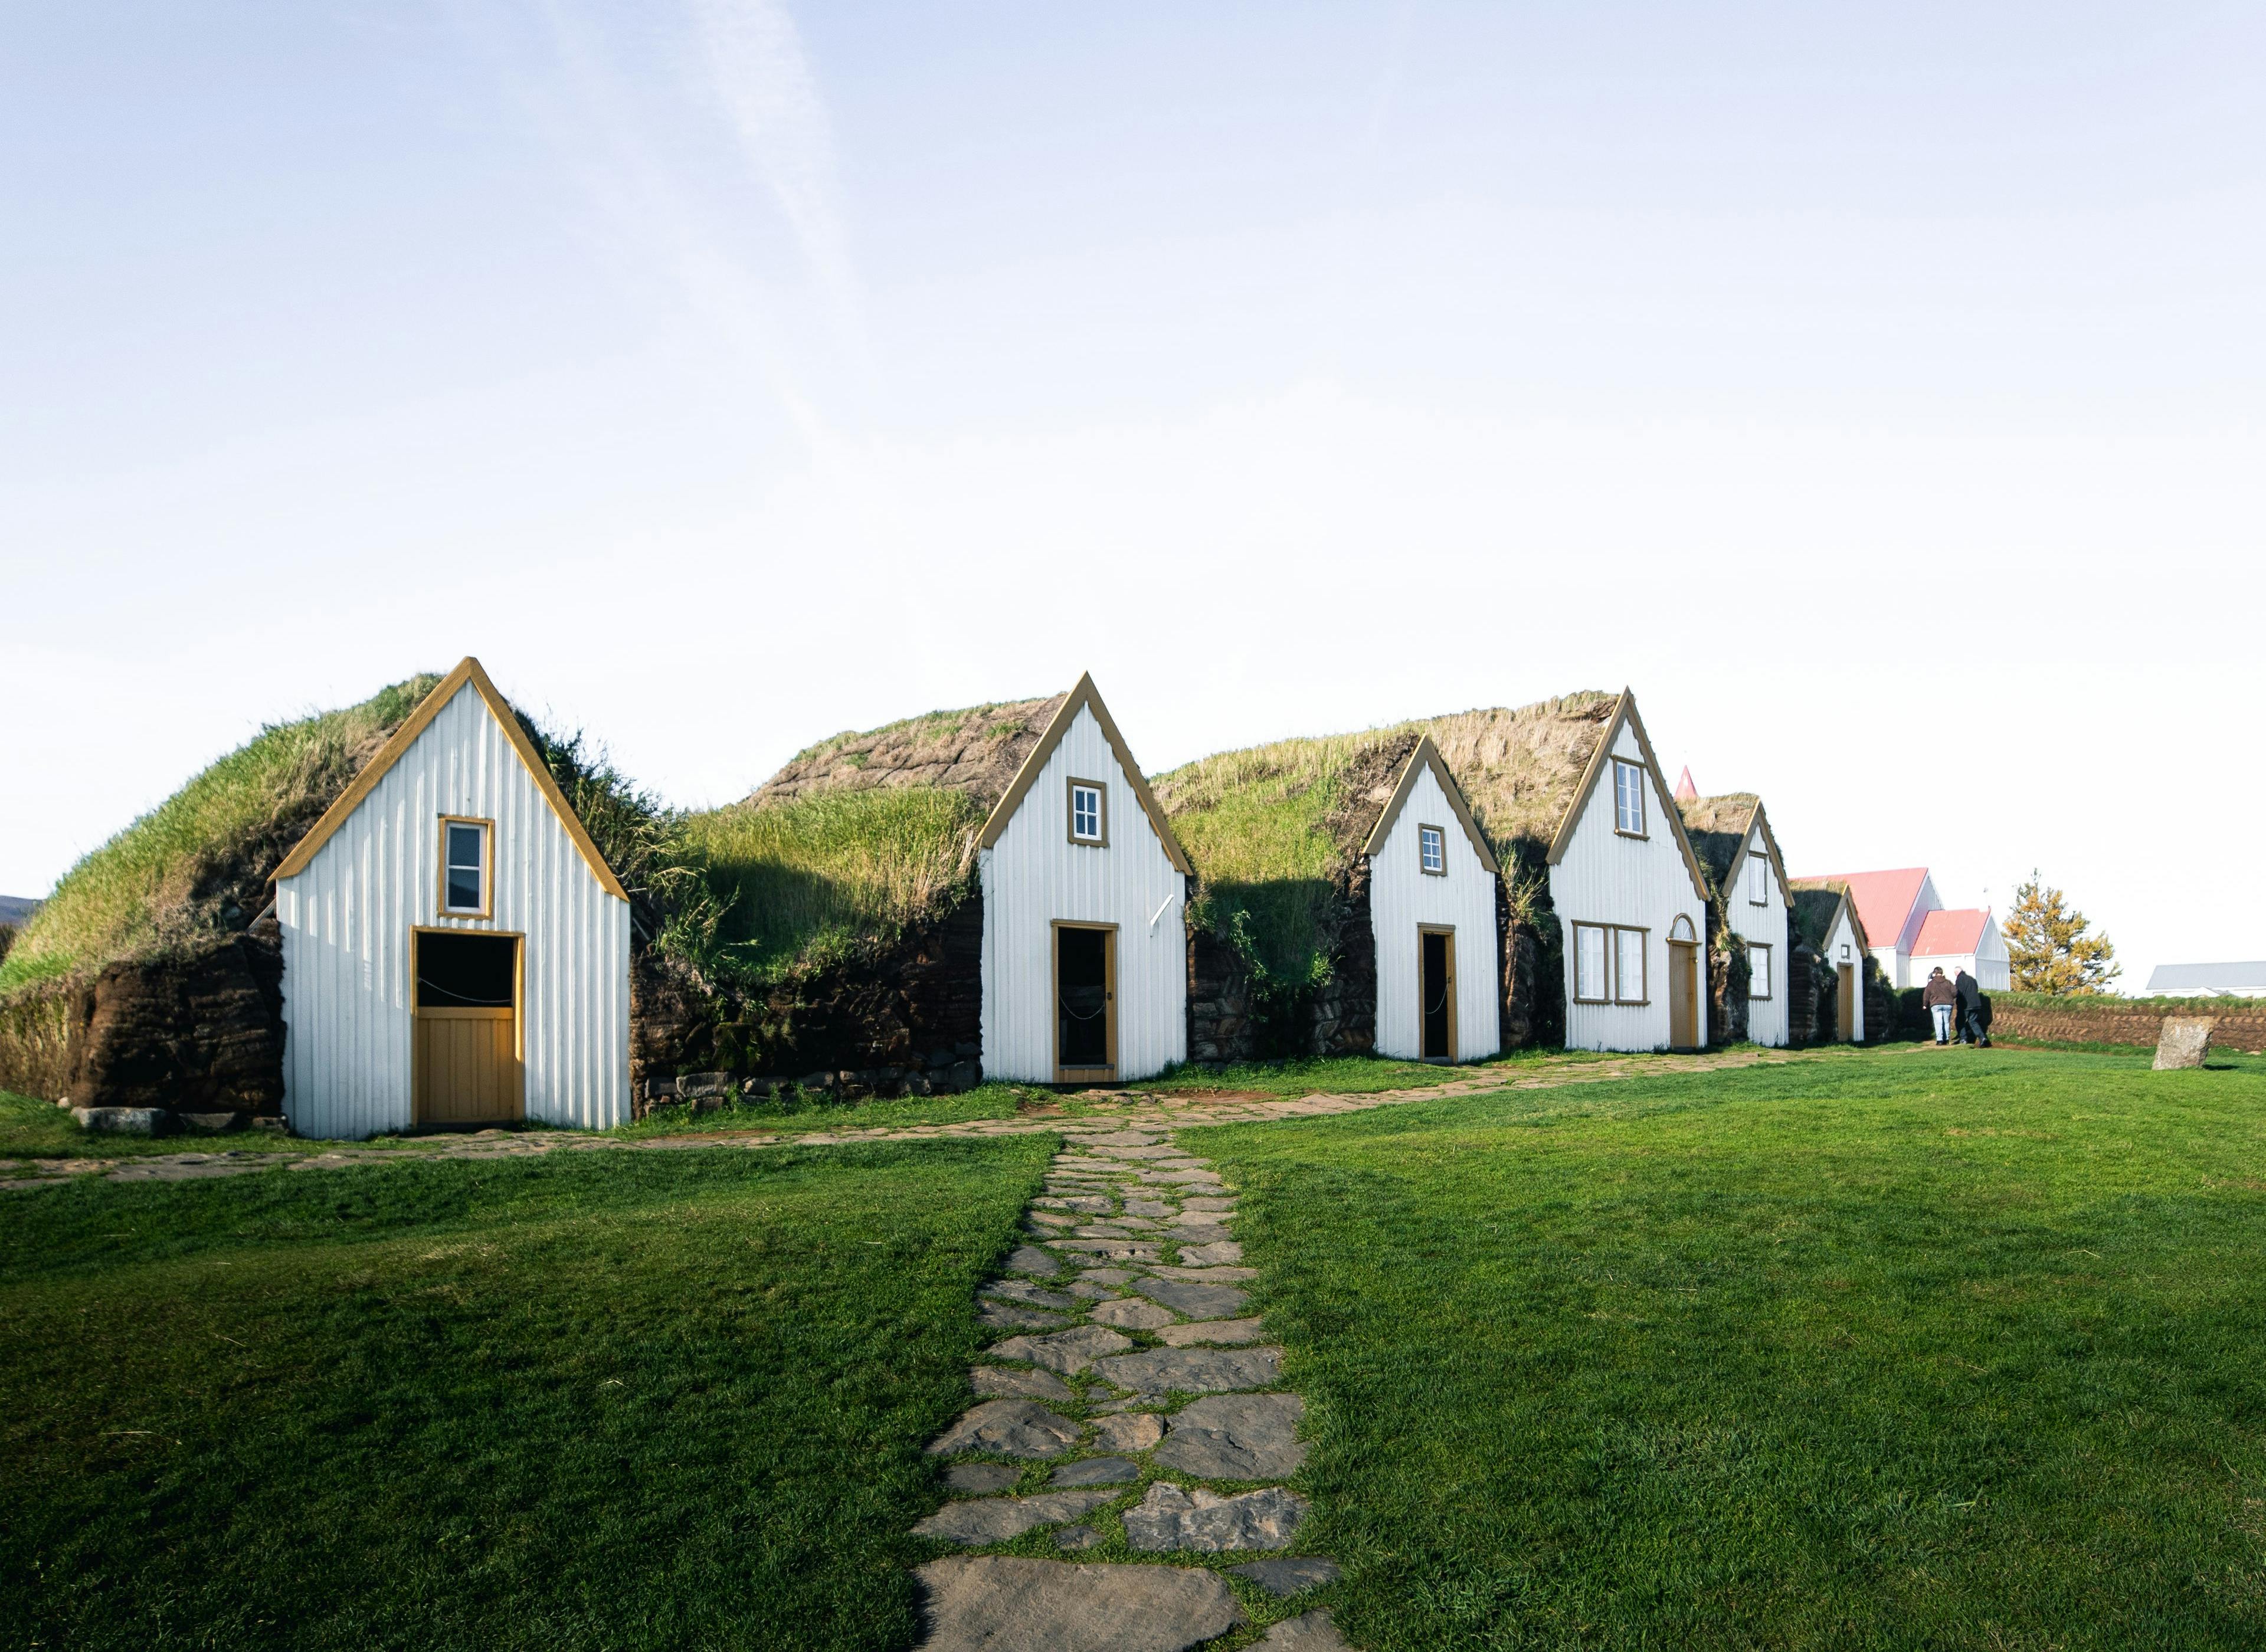 Sod houses with white wooden front